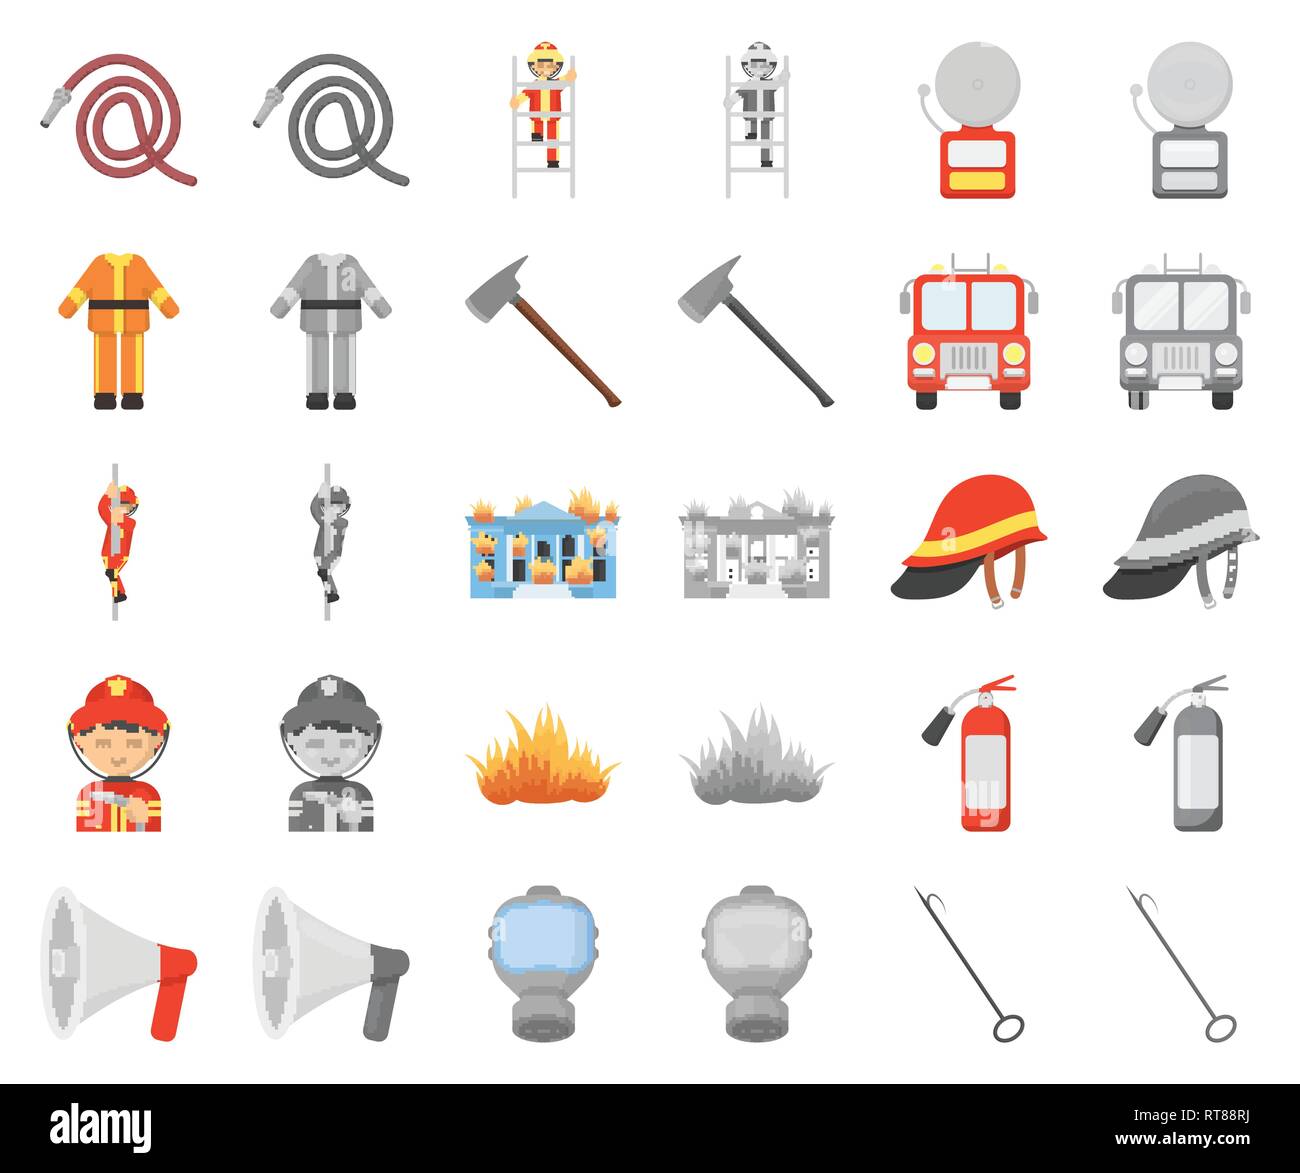 accessories,apparatus,art,attribute,axe,bucket,building,bunker,cartoon,monochrom,collection,conical,department,design,equipment,extinguishing,extingushier,fire,firefighter,firefighting,flame,gas,gear,helmet,icon,illustration,isolated,logo,mask,organization,pike,pole,pump,ring,separation,service,set,sign,slide,symbol,tools,vector,web Vector Vectors , Stock Vector